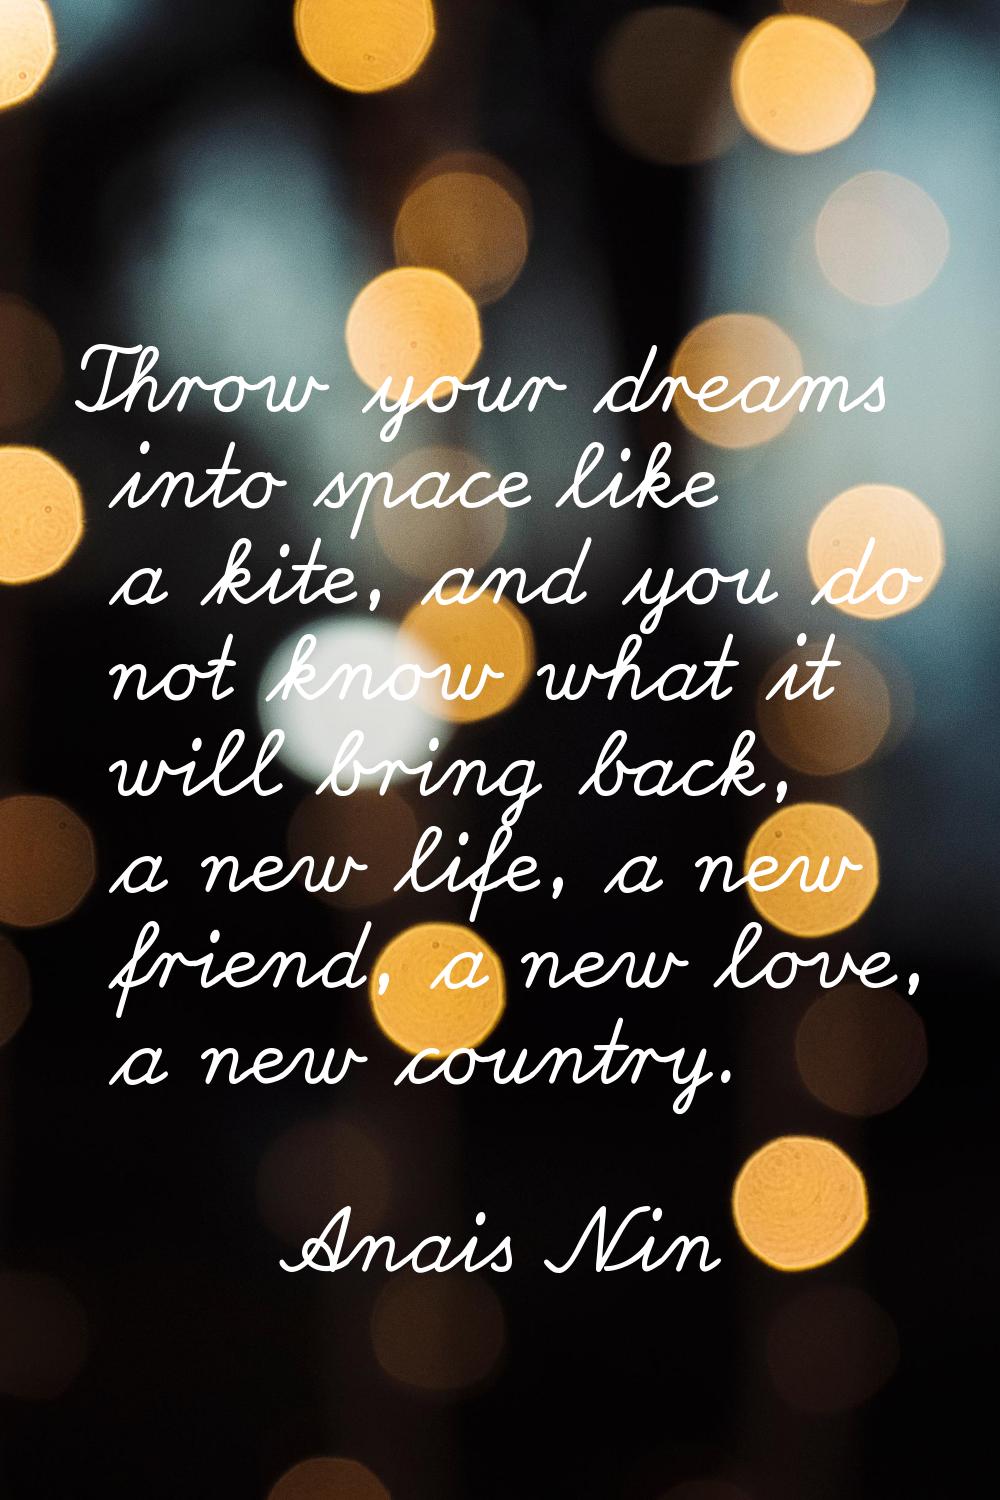 Throw your dreams into space like a kite, and you do not know what it will bring back, a new life, 